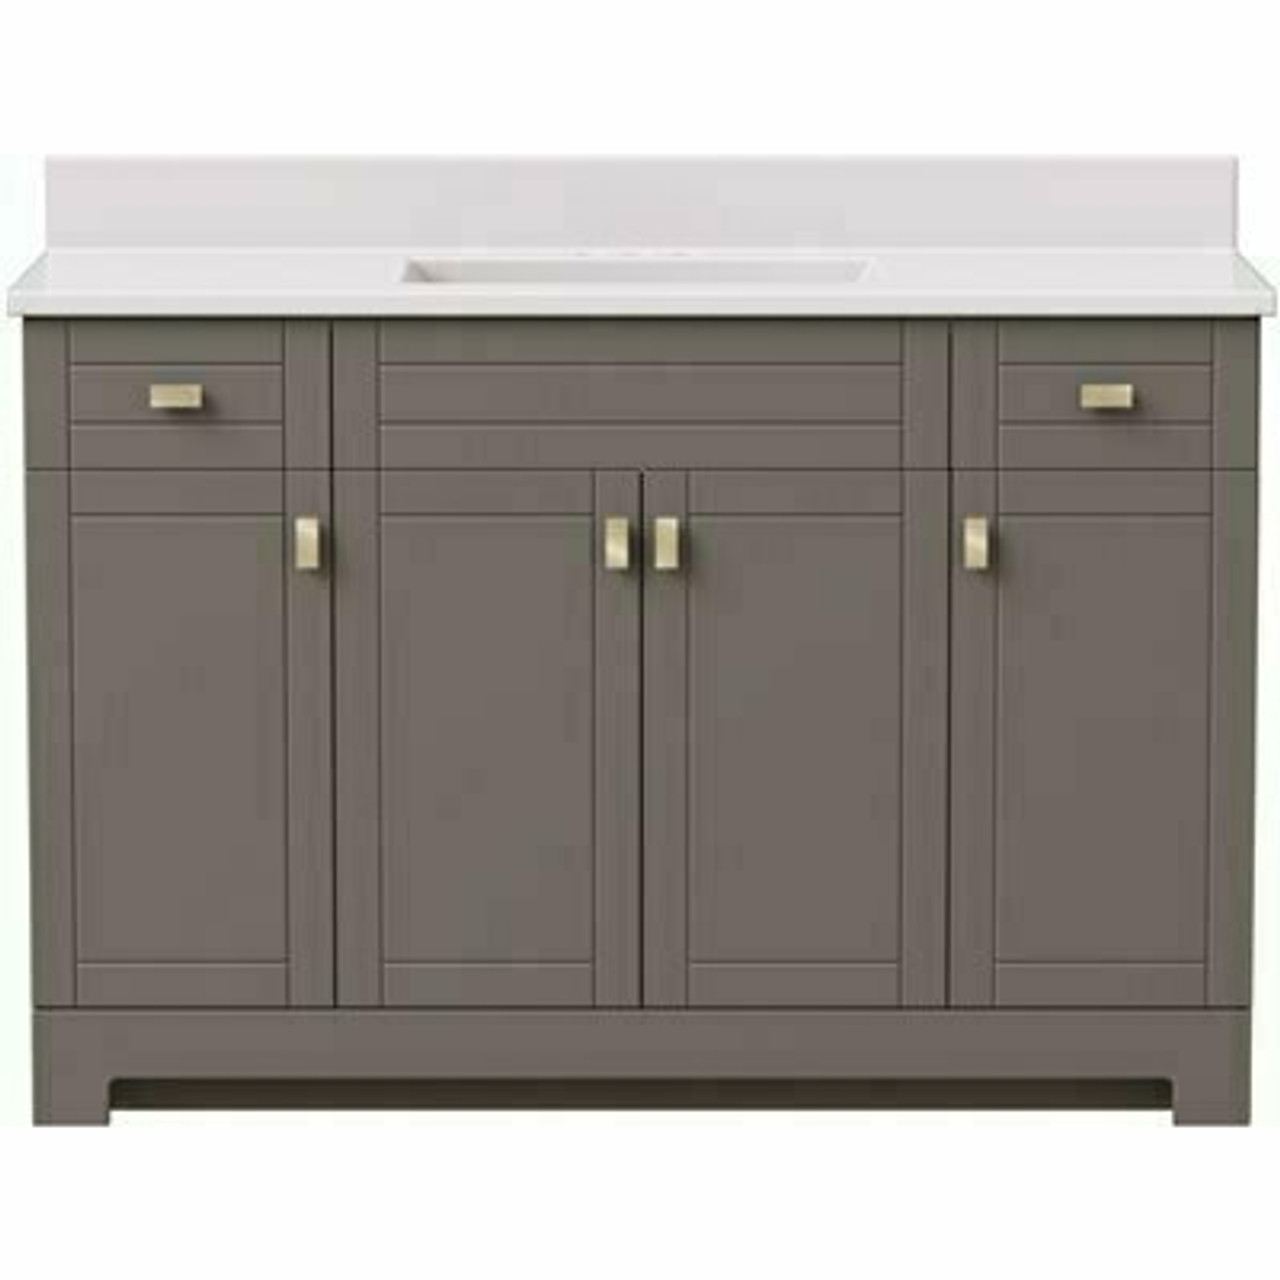 Canberra 49 In. W X 19 In. D Bath Vanity In Gray Slate With Cultured Marble Vanity Top In Solid White With White Basin